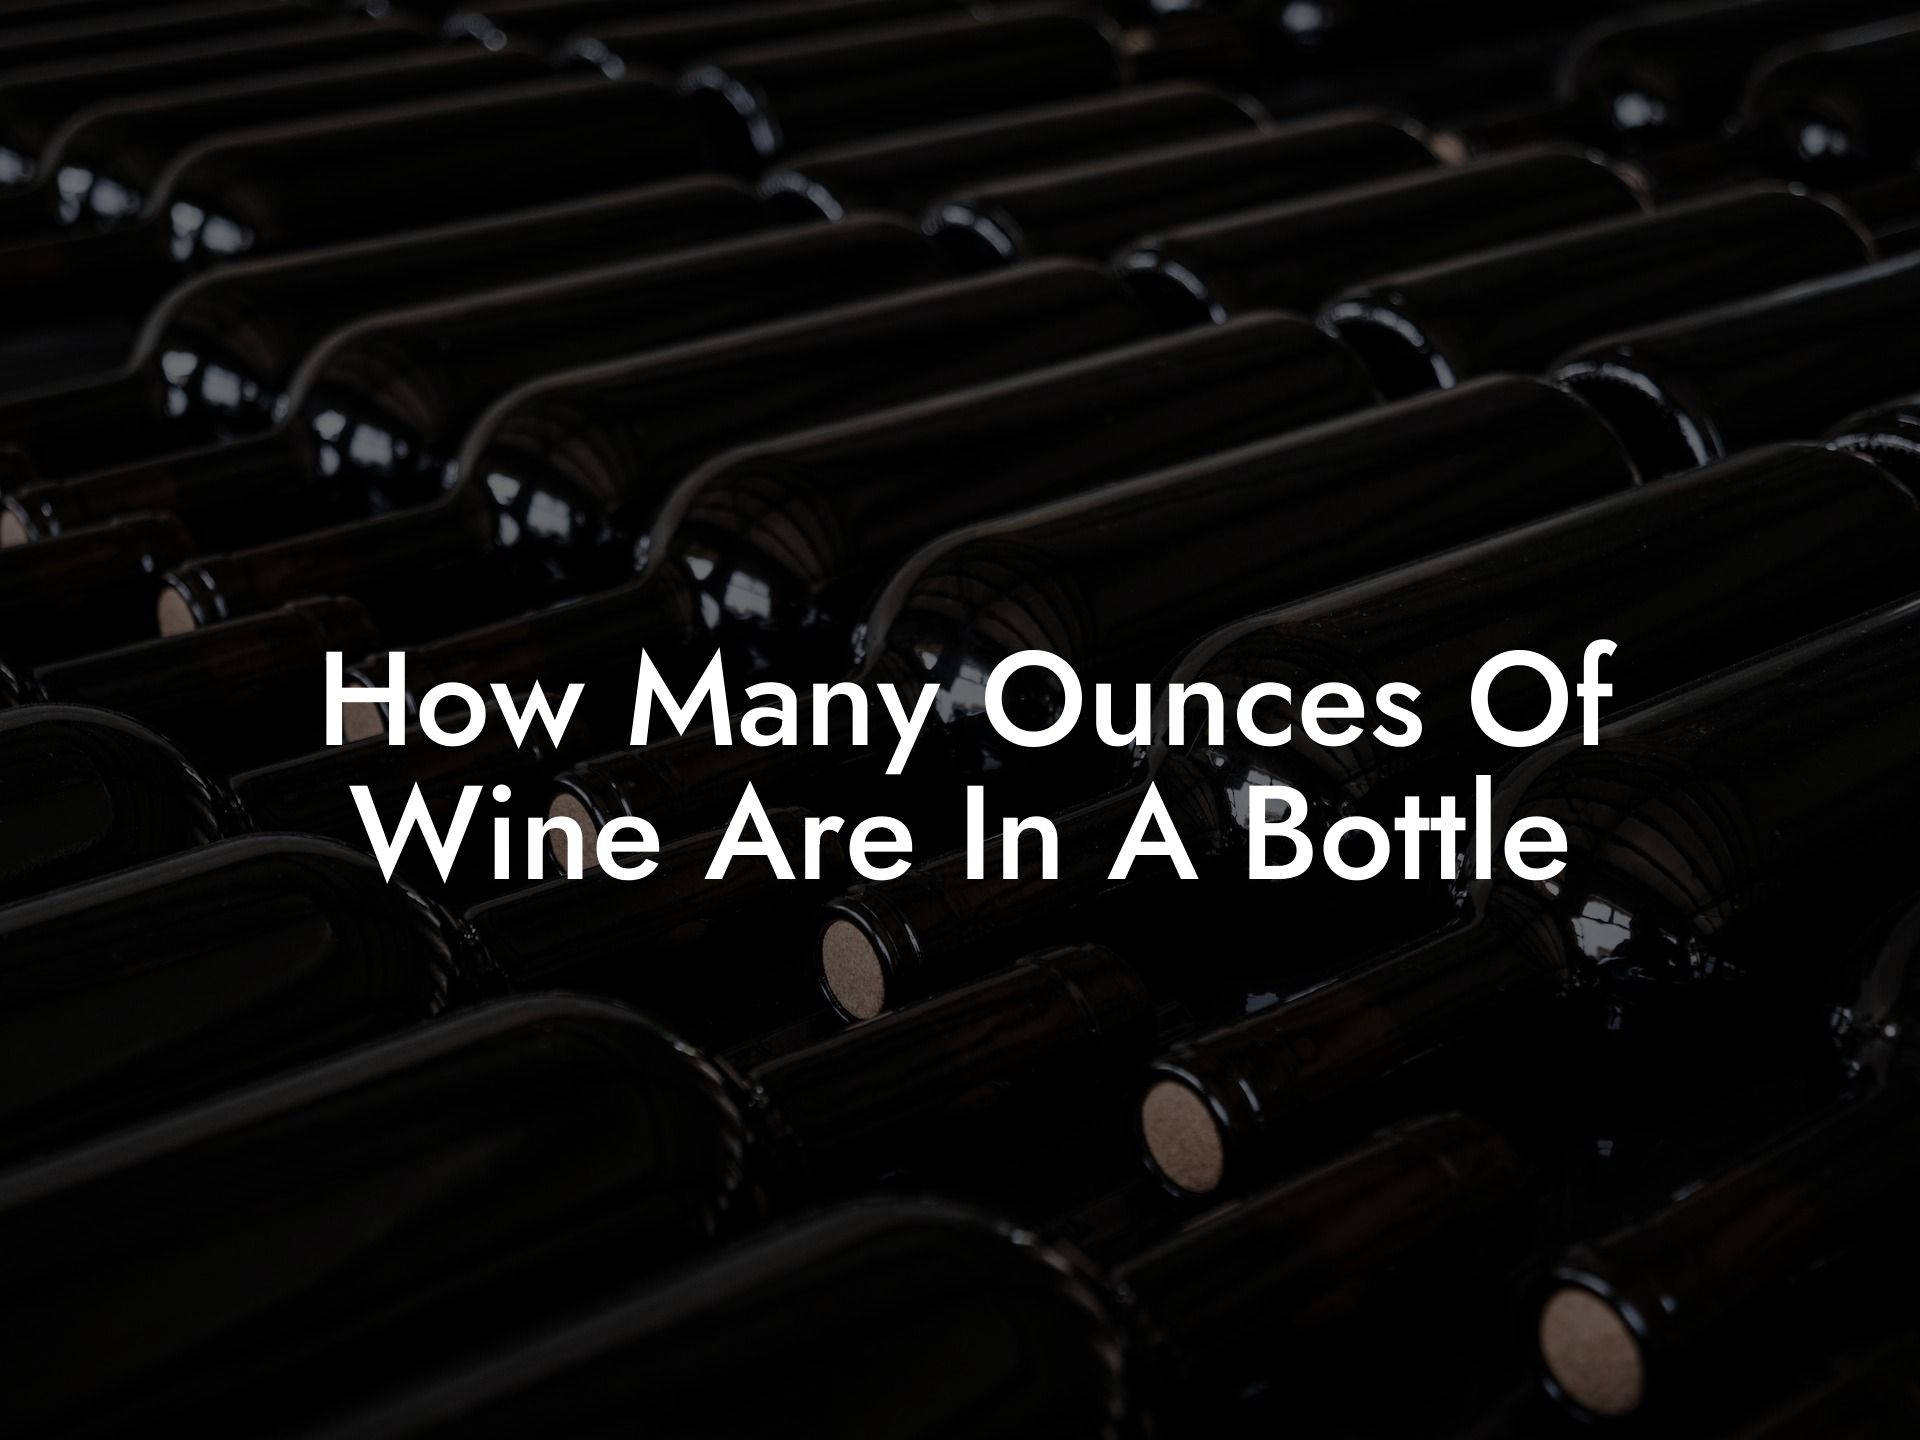 How Many Ounces Of Wine Are In A Bottle